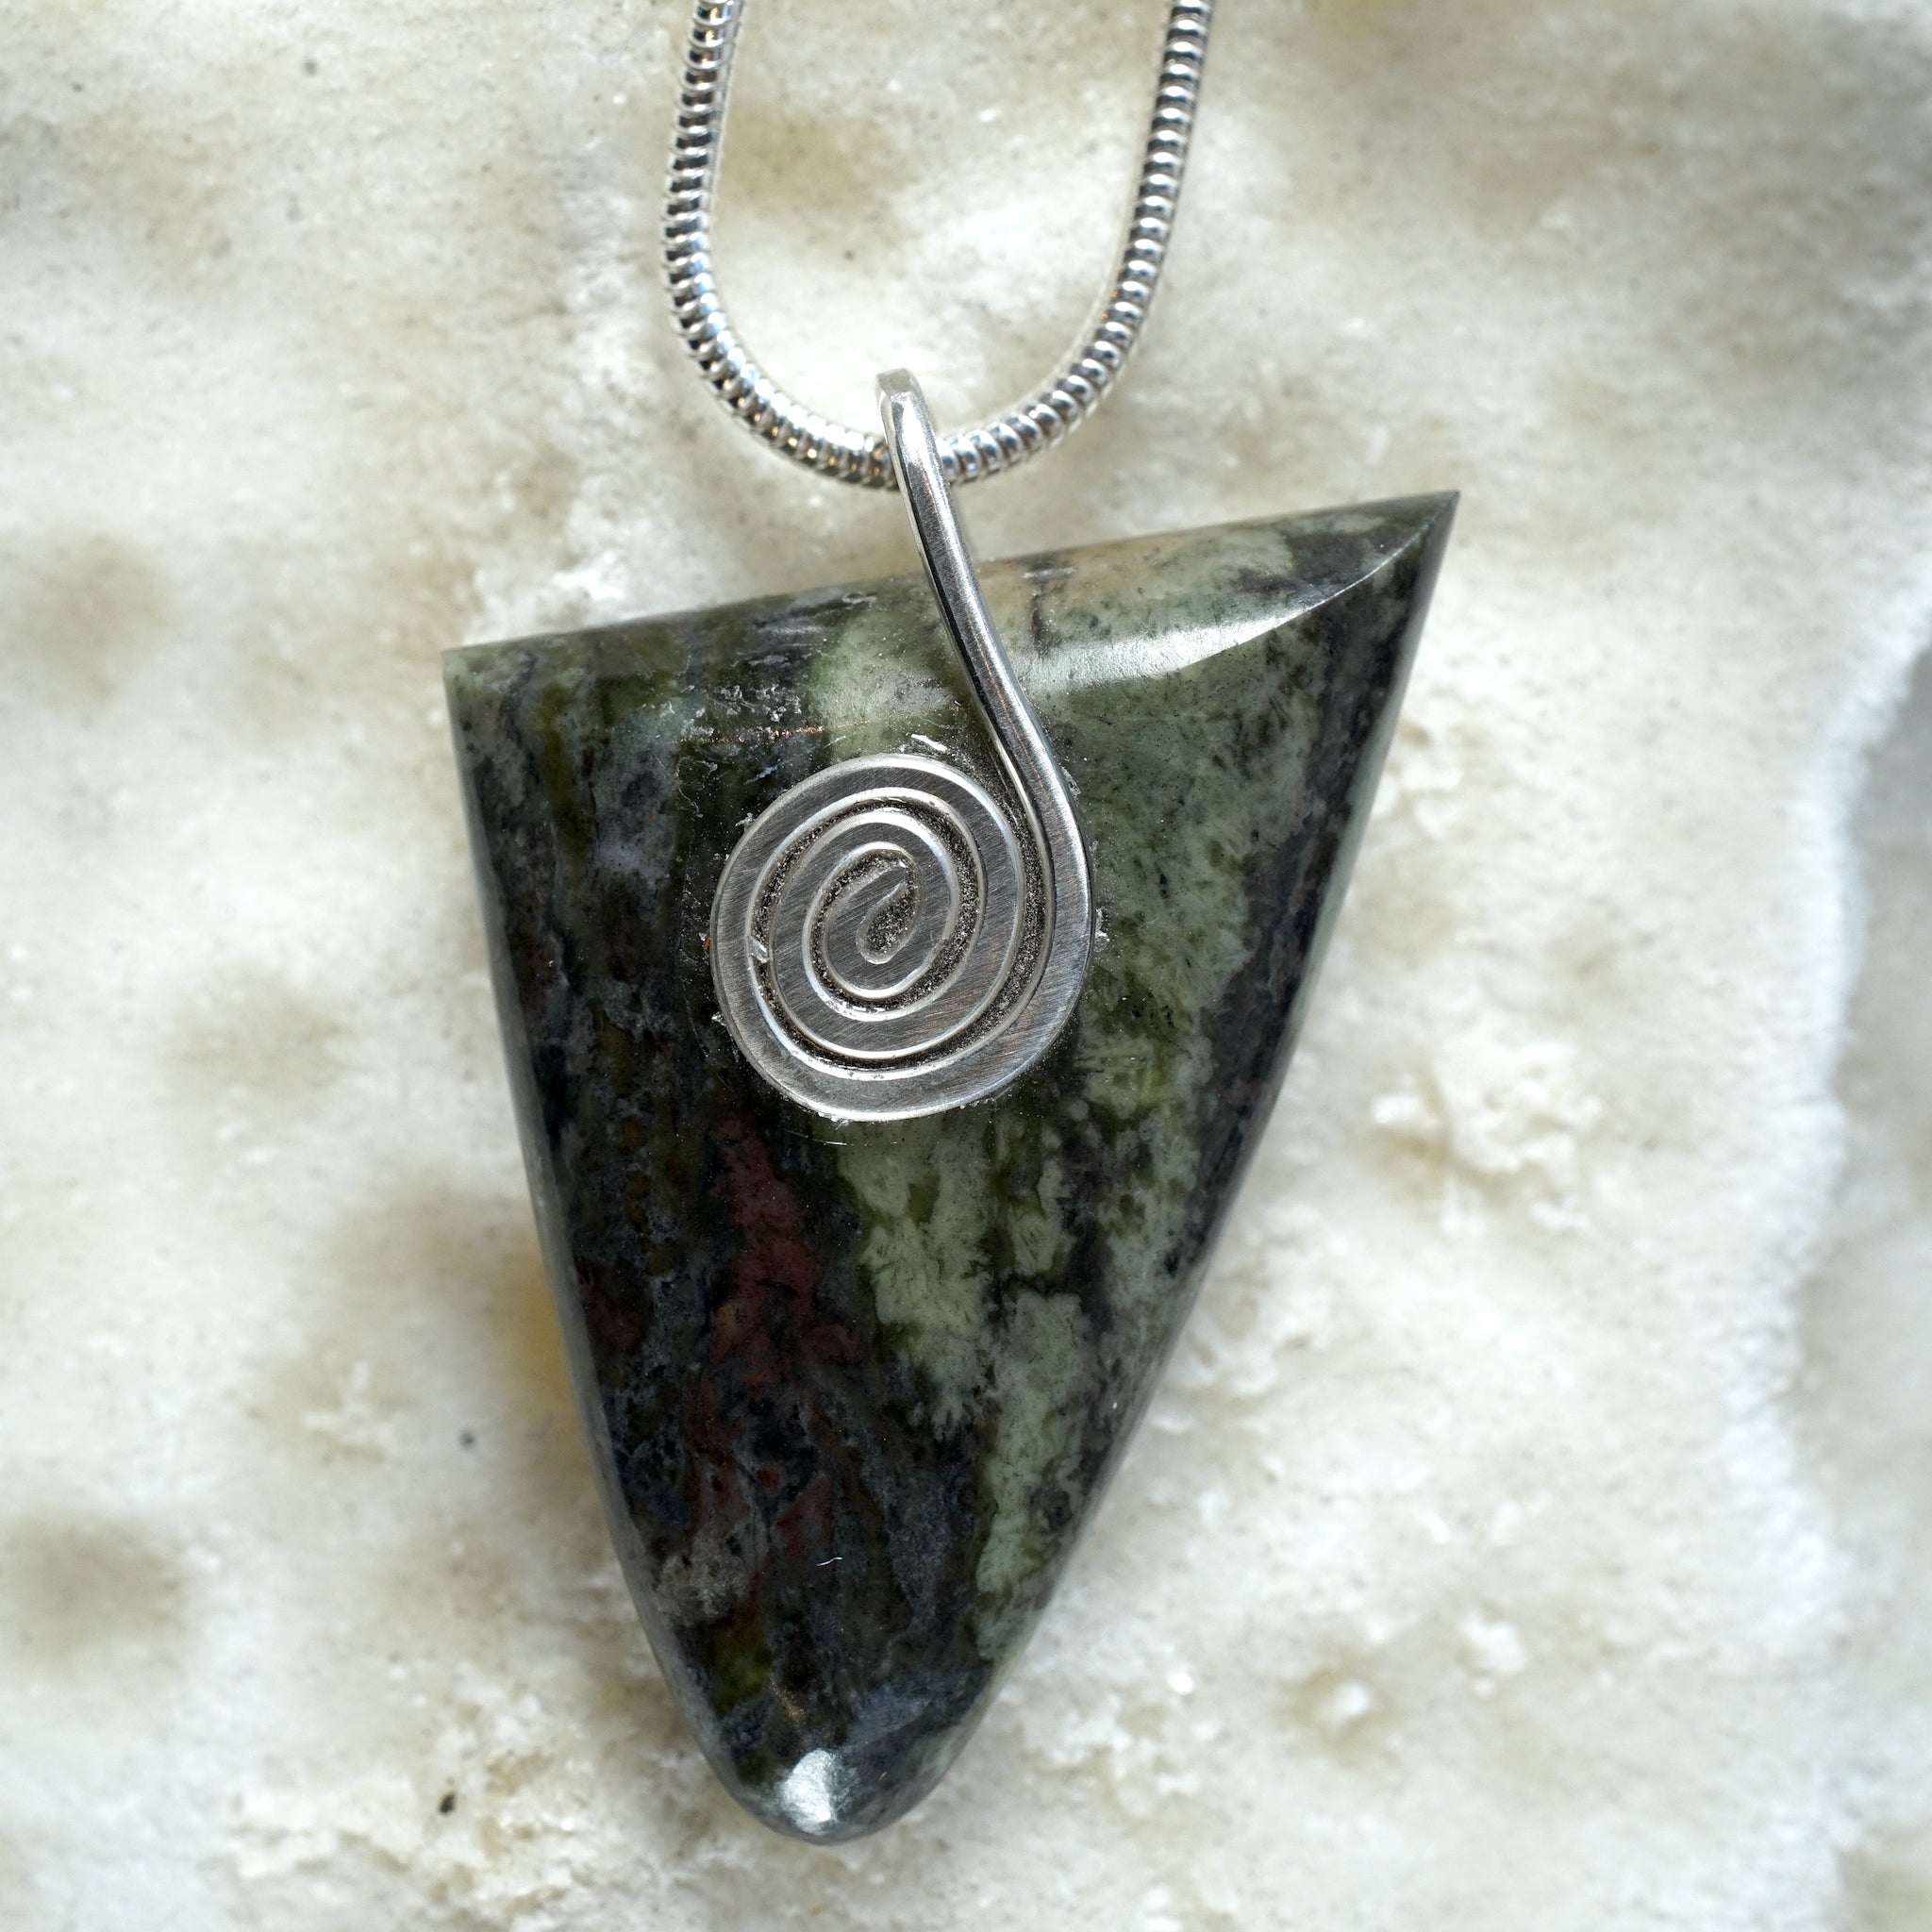 Connemara Marble Triangle Pendant with a Sterling Silver Celtic Spiral from Angela Kelly Jewellery Enniskillen Fermanagh